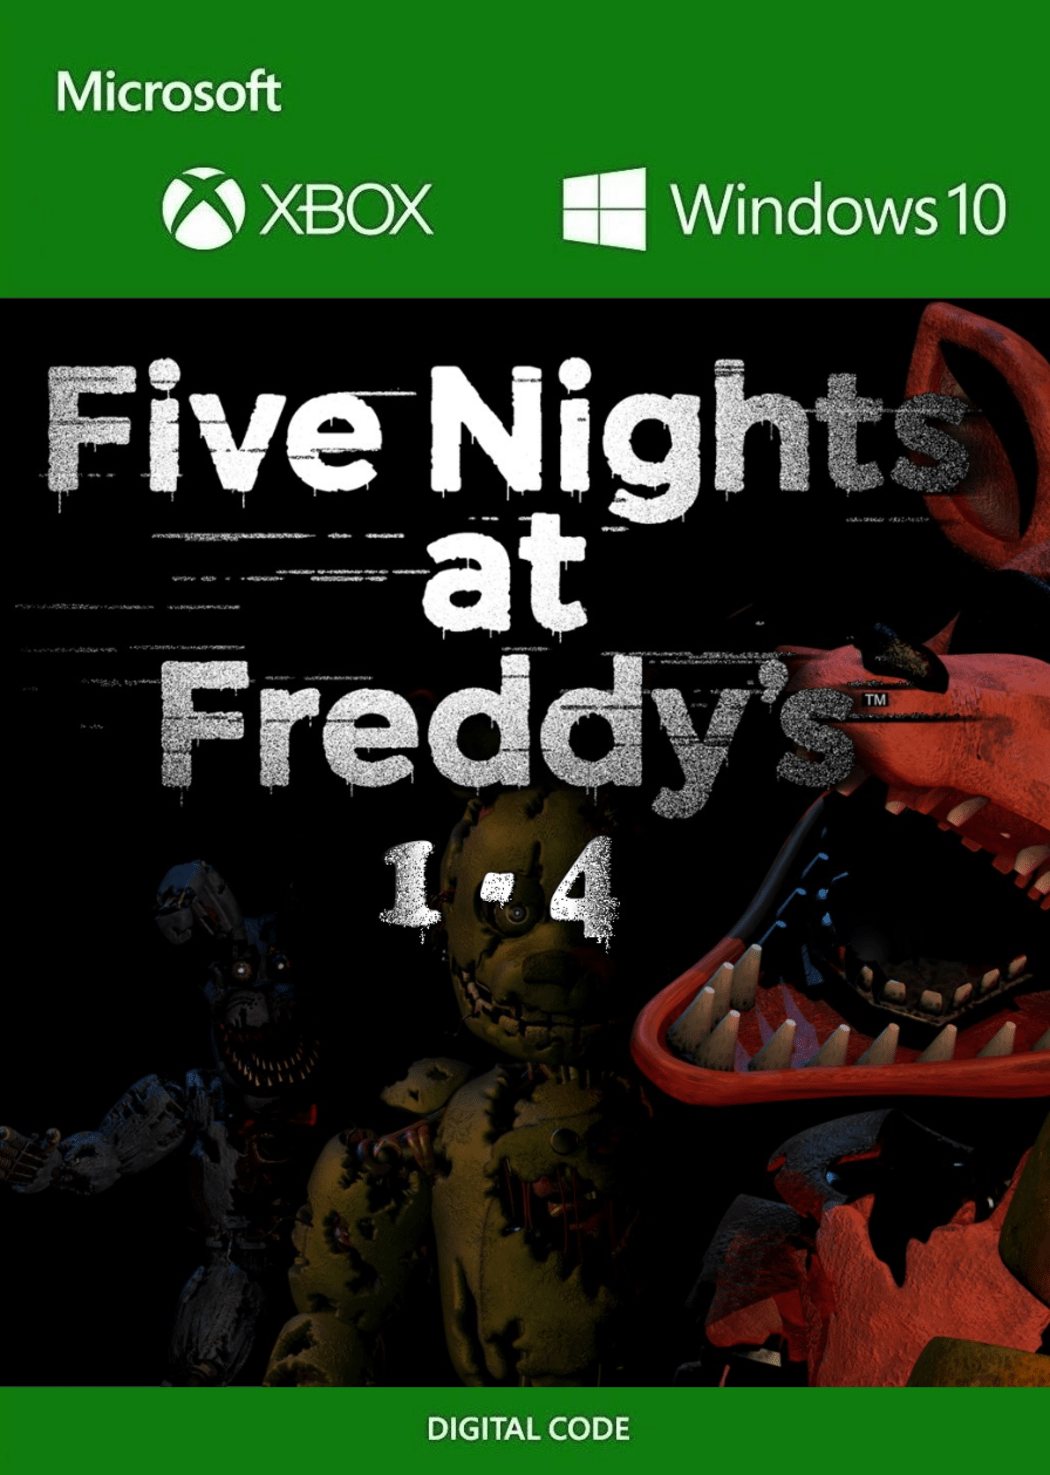 Five Nights at Freddy's Core Collection - XboxOne/Series X 